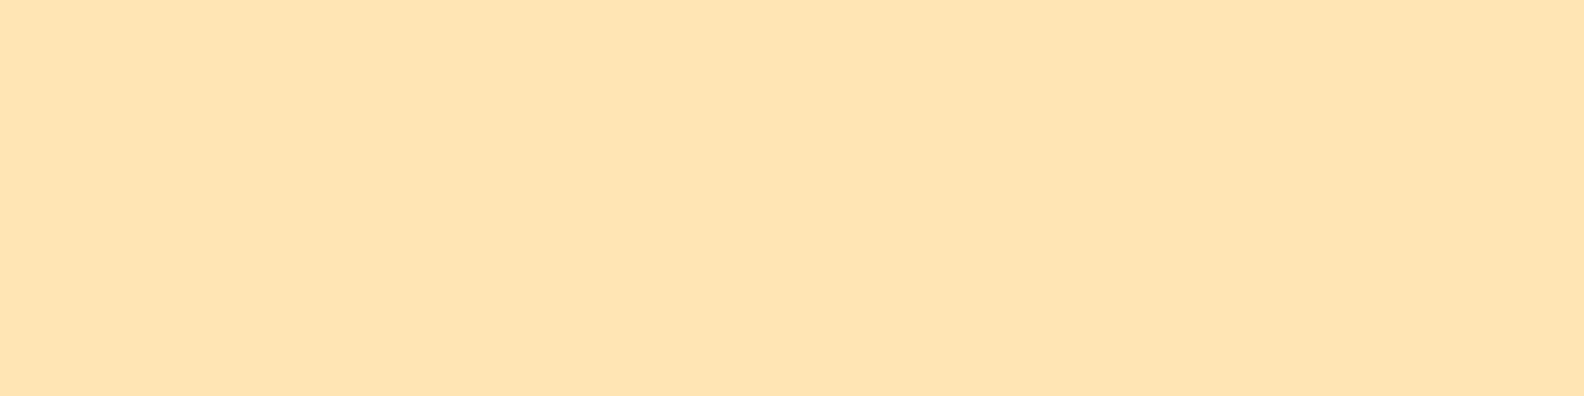 1584x396 Peach Solid Color Background